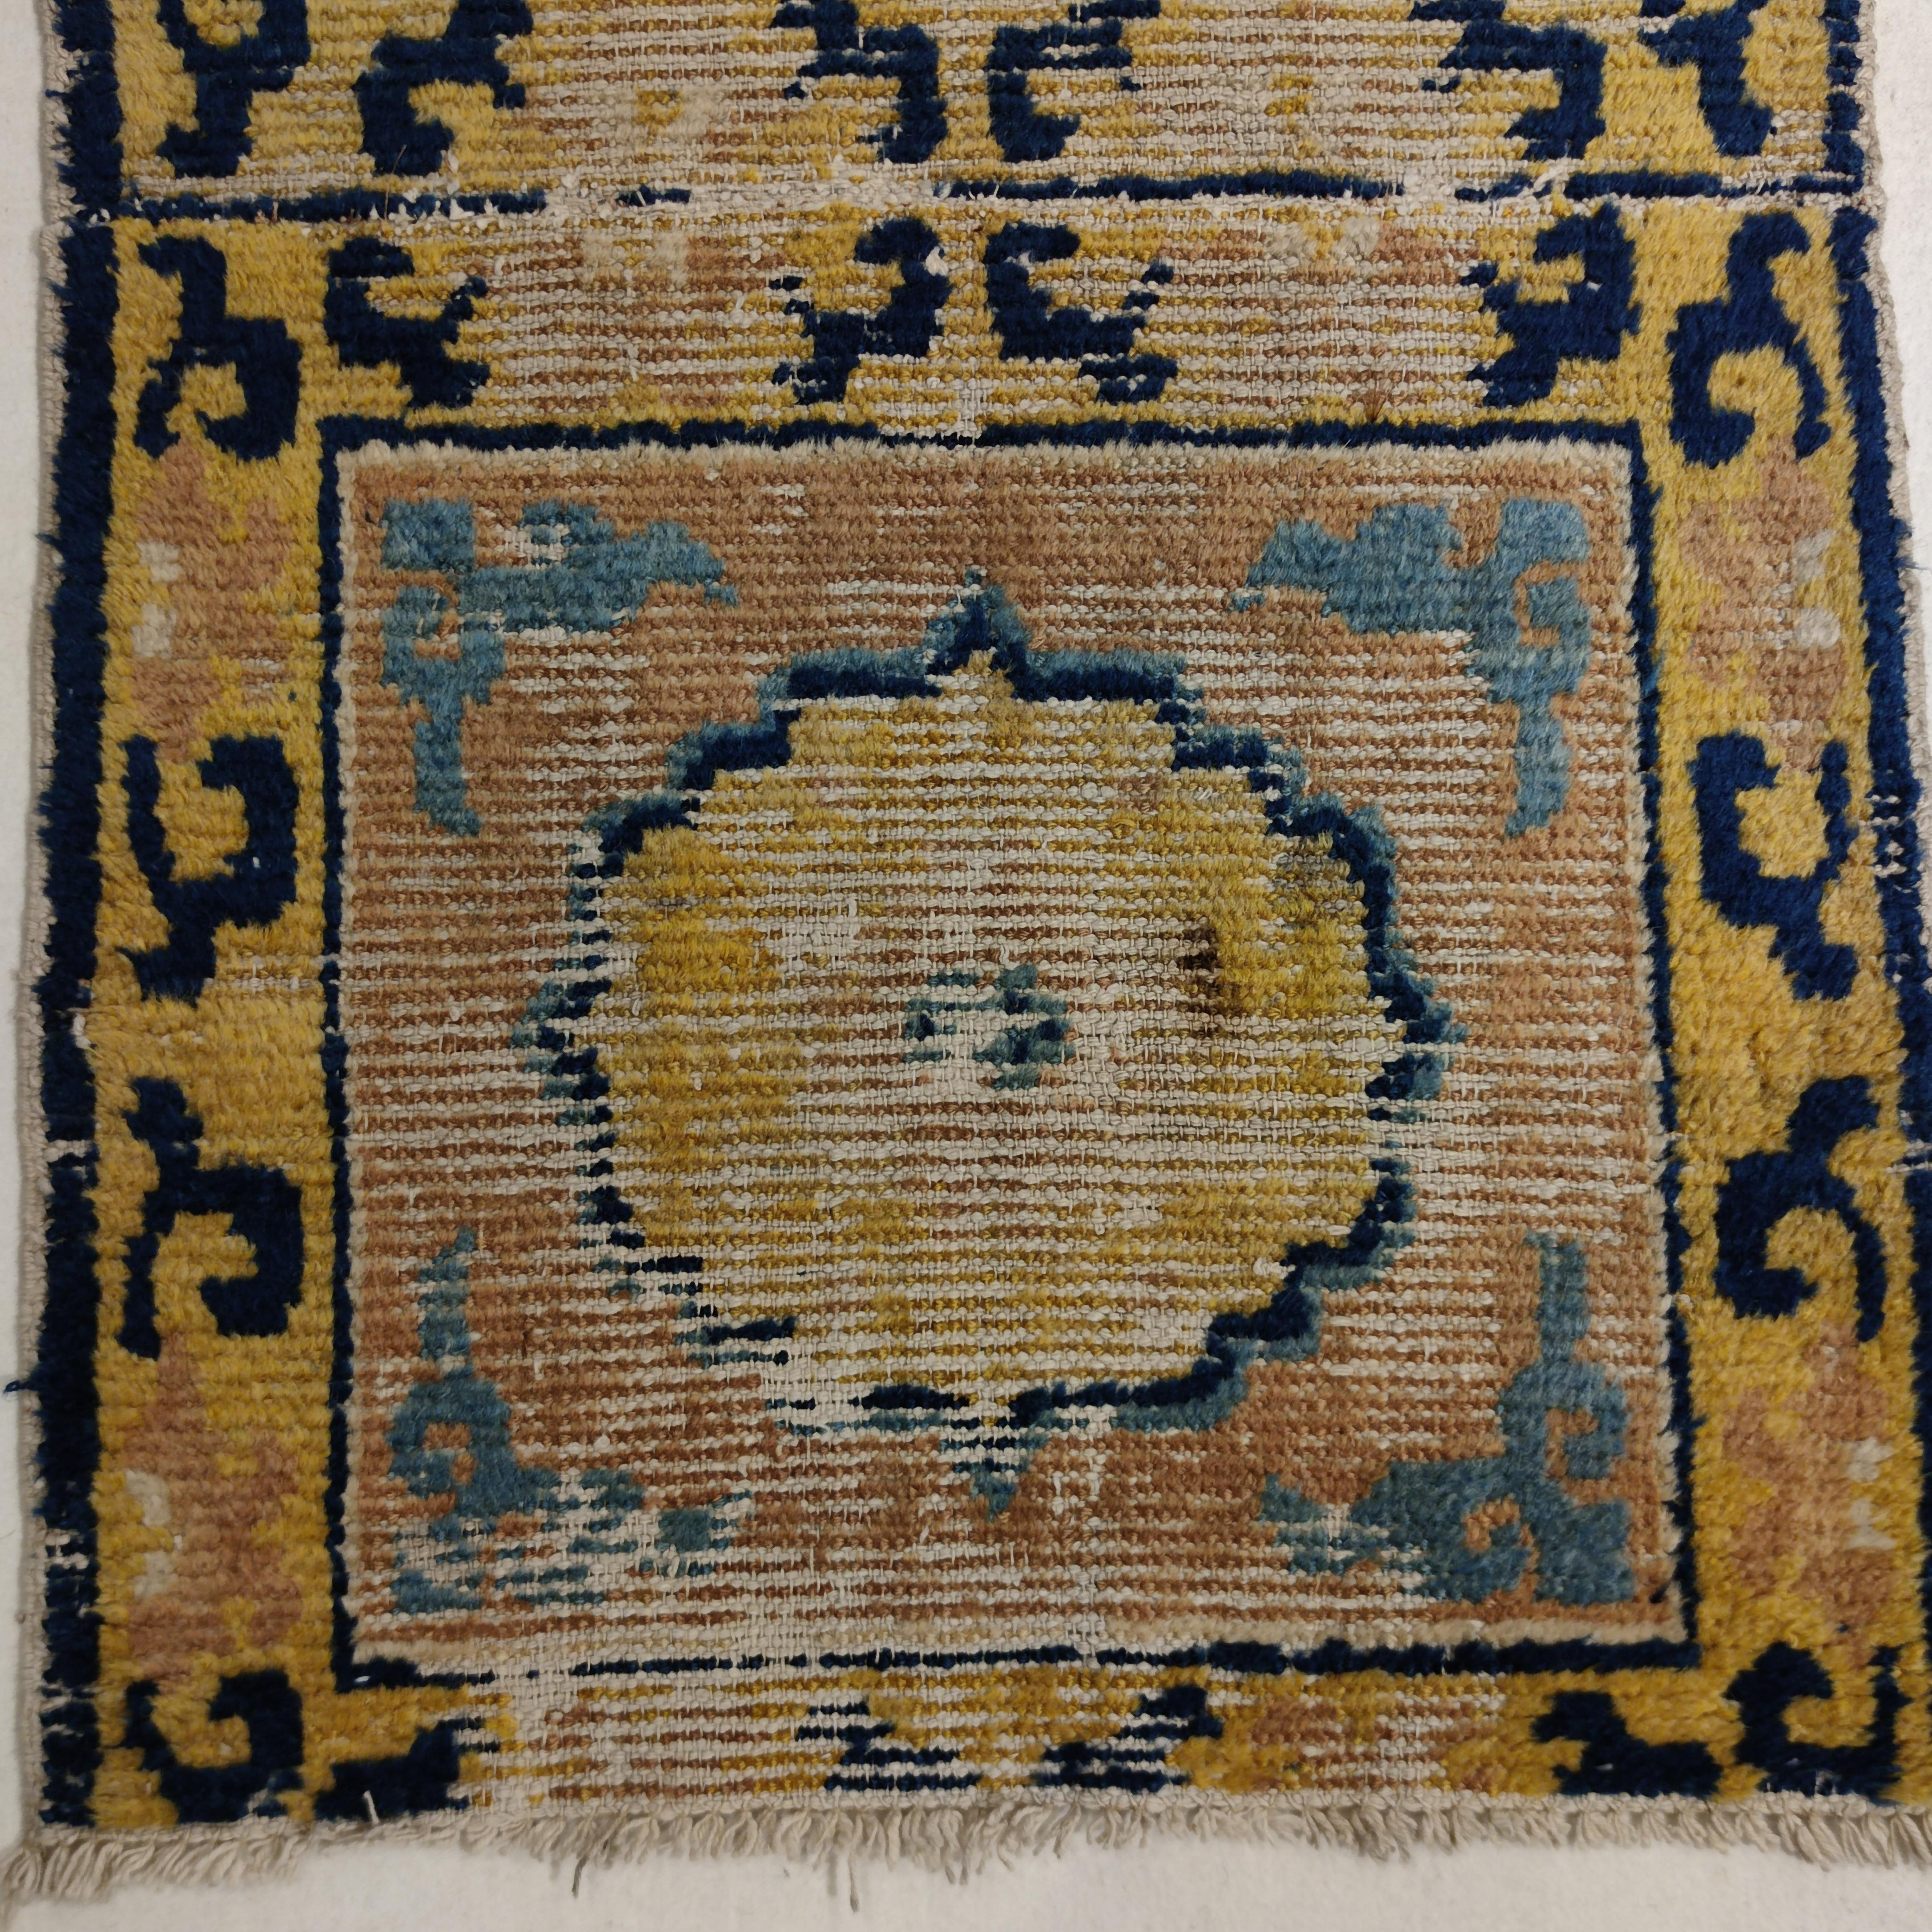 An exquisitely elegant early Temple runner from the Ningxia region in northwest China, commissioned in the early 18th century for a Buddhist monastery in Tibet. The pattern is composed of seven squares, each of which was to be used as a meditation